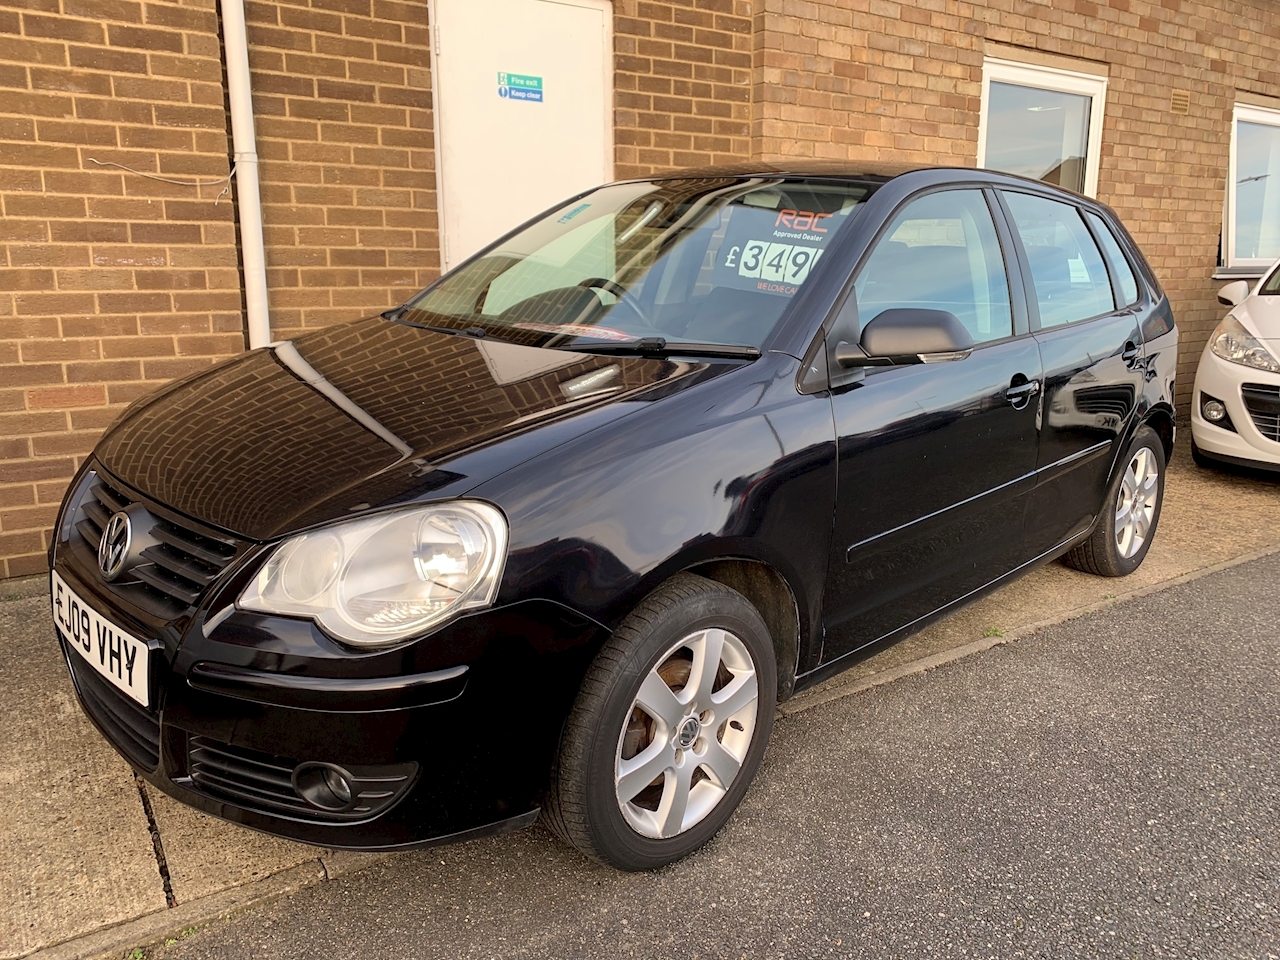 Used Polo 9n3 for Sale, Used Cars